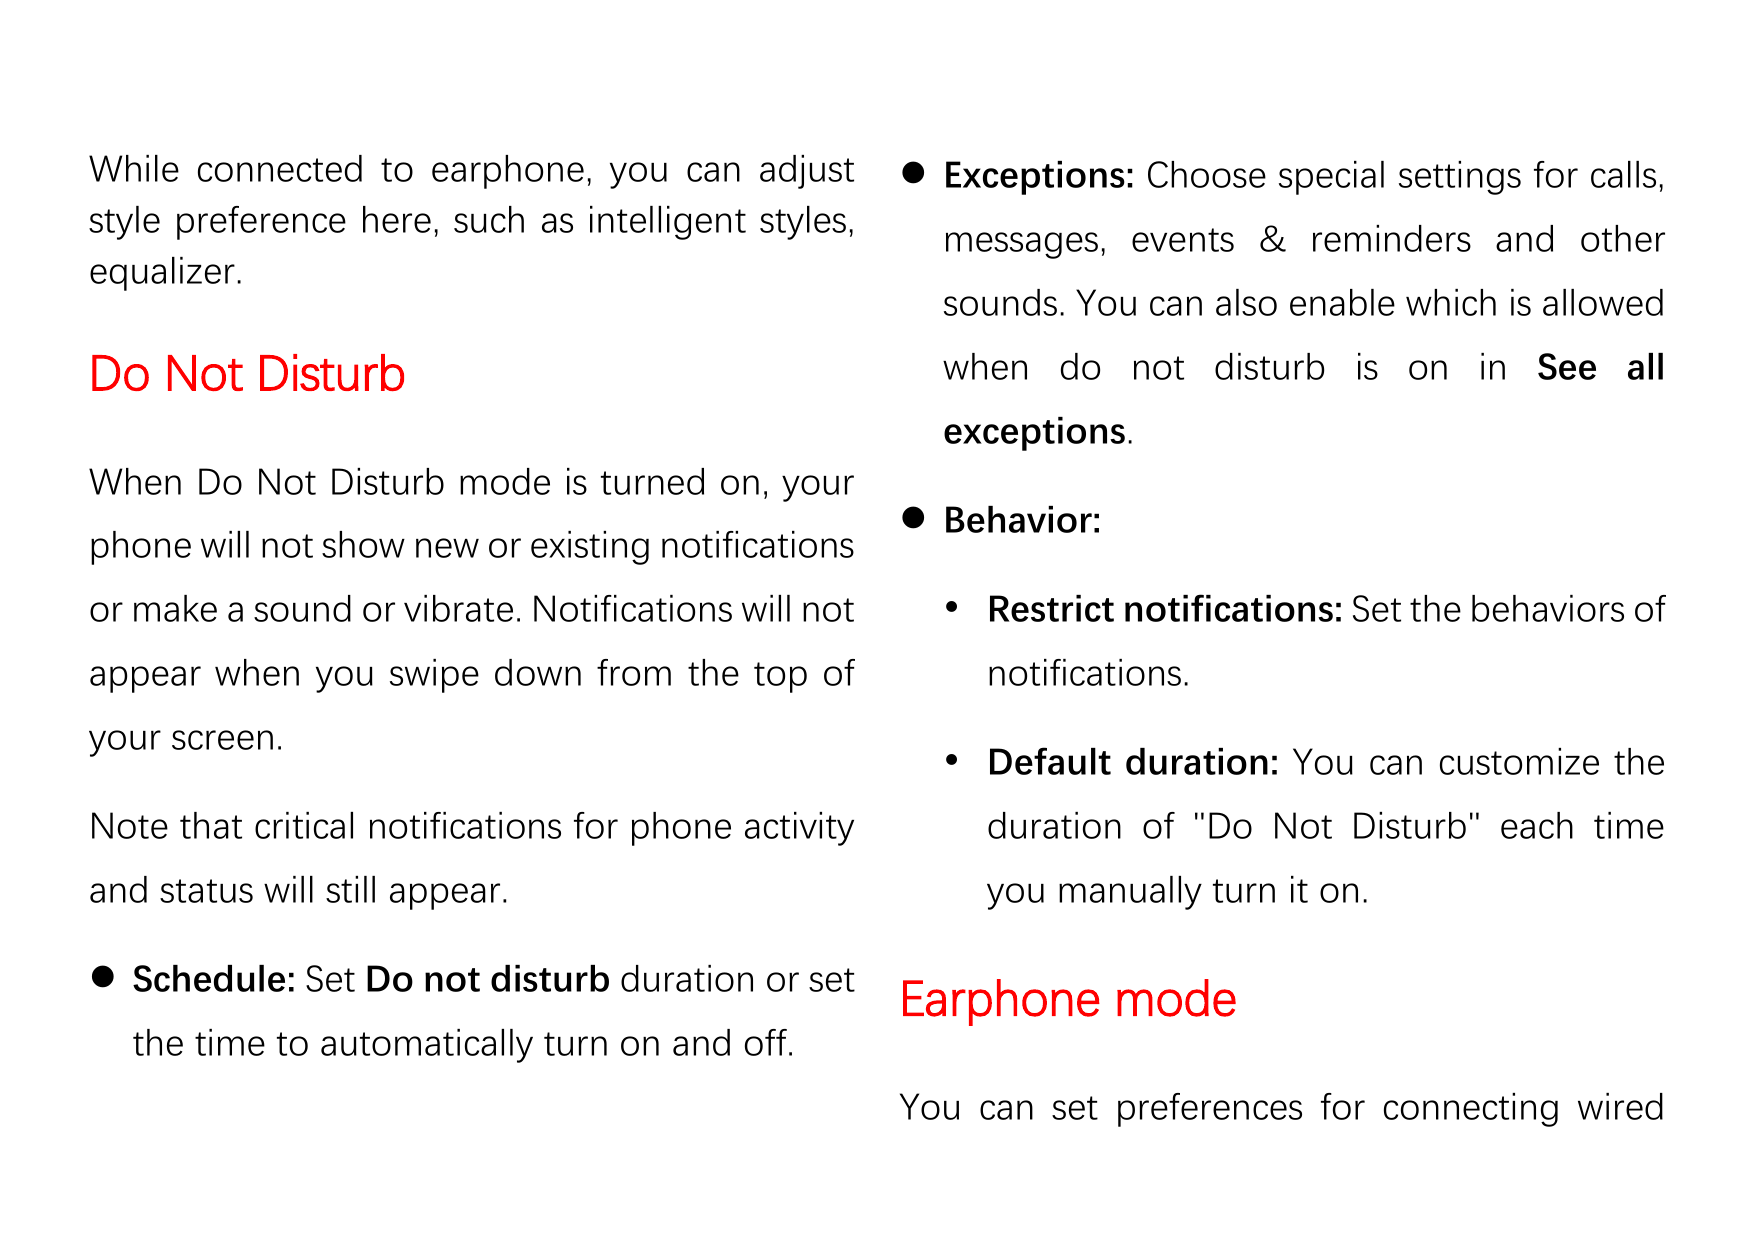 While connected to earphone, you can adjuststyle preference here, such as intelligent styles,equalizer.Do Not Disturb Exception